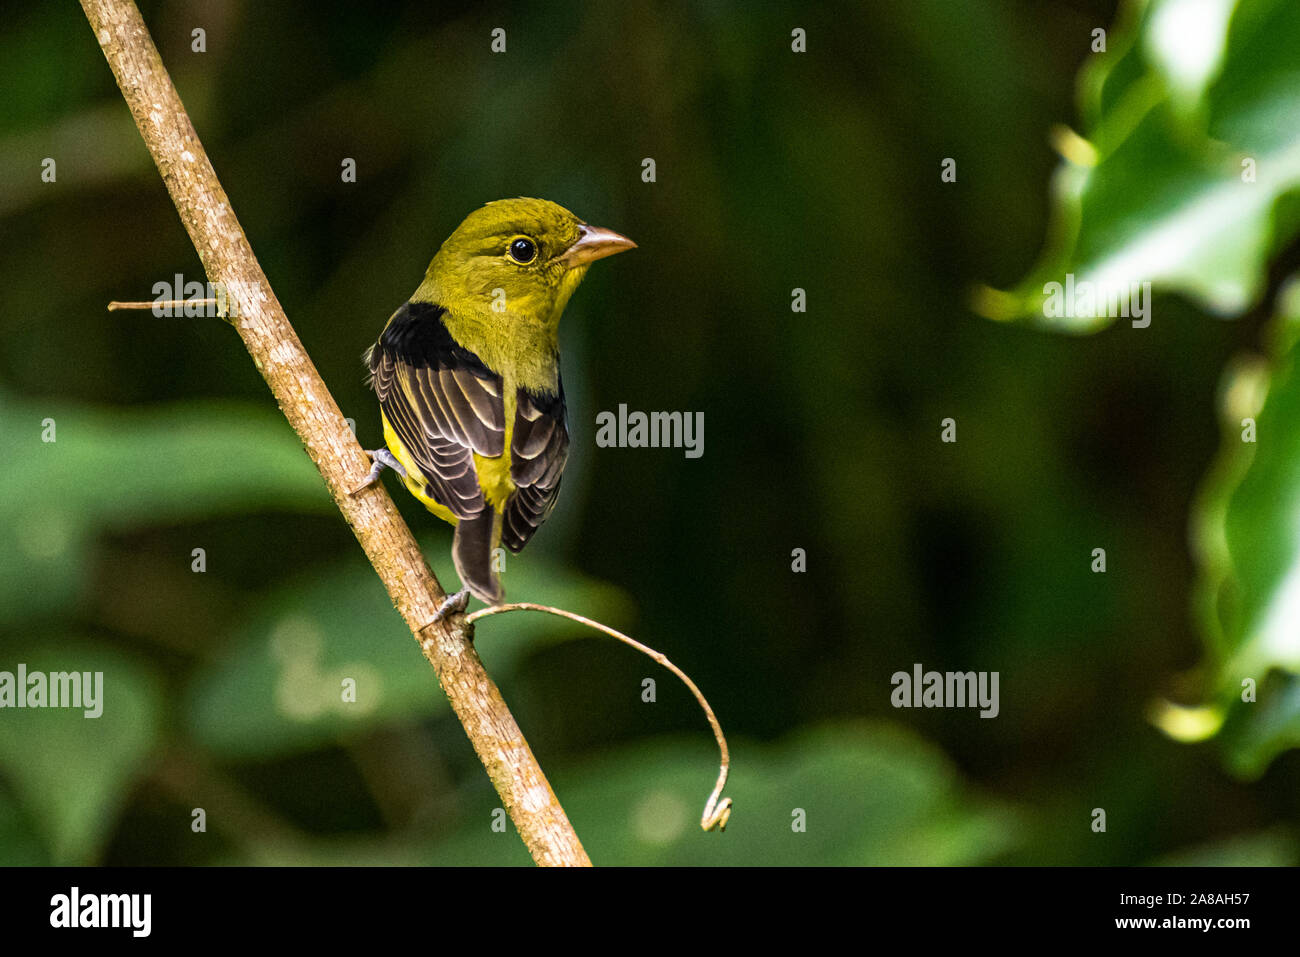 Little olive green bird perched with dark green background image taken in Panama Stock Photo